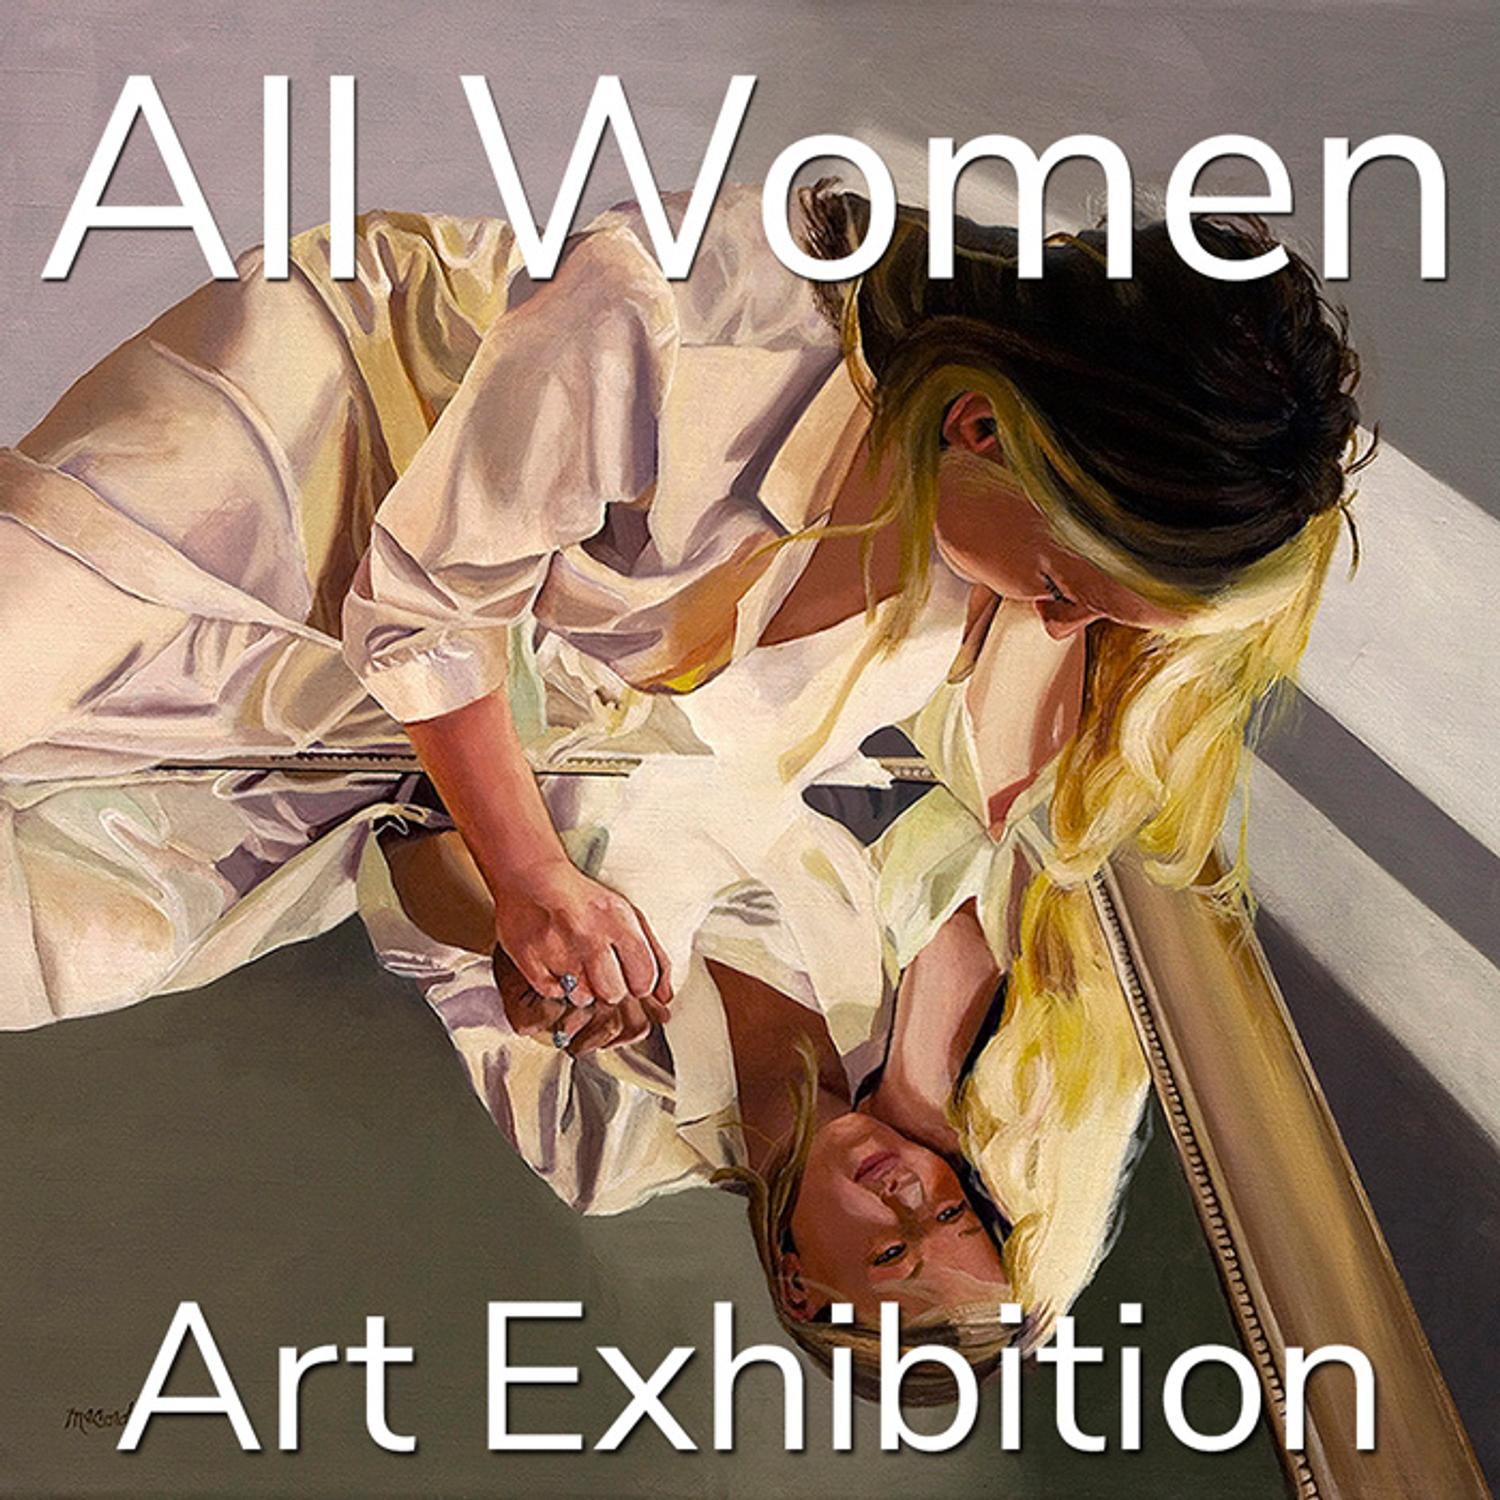 Annual exhibition spotlighting 'Artists' Books by Women' - News and Events